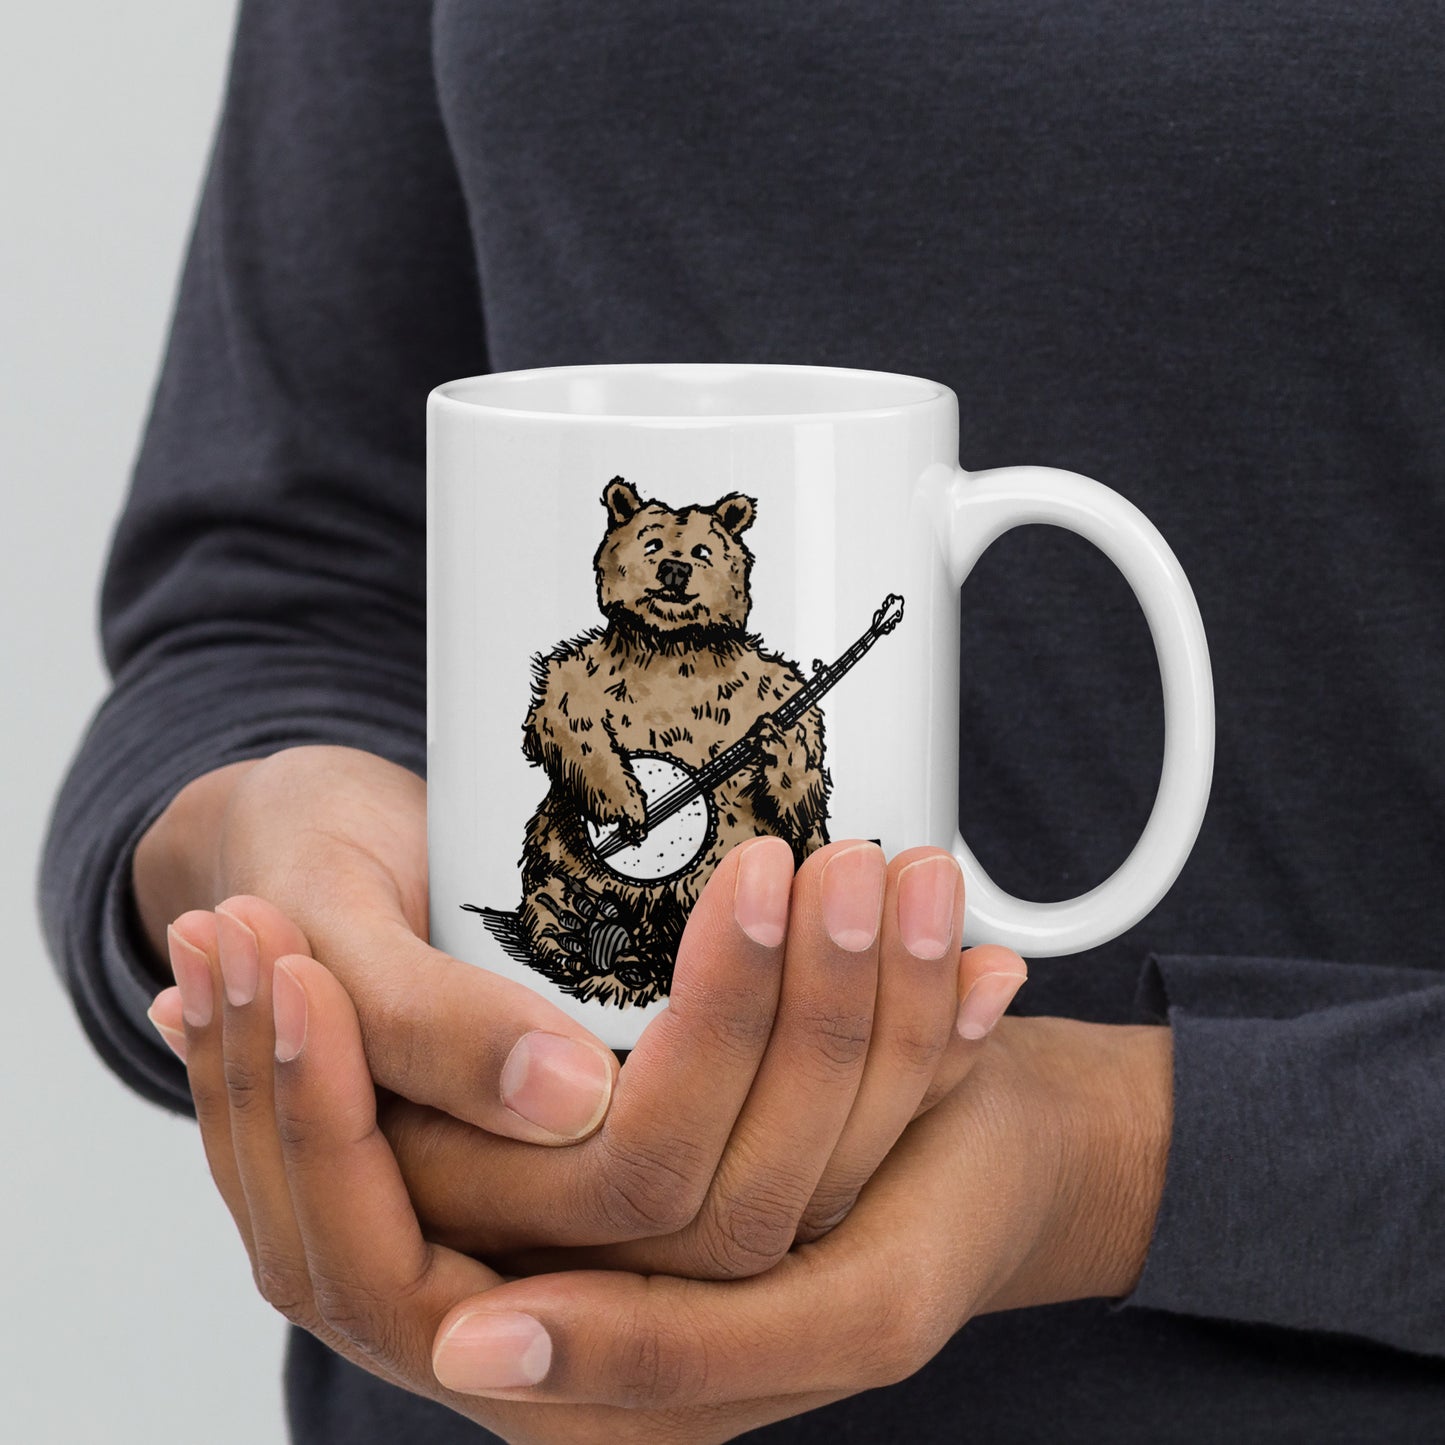 BellavanceInk: White Coffee Mug With A Grizzly Bear Playing The Banjo Pen & Ink Illustration